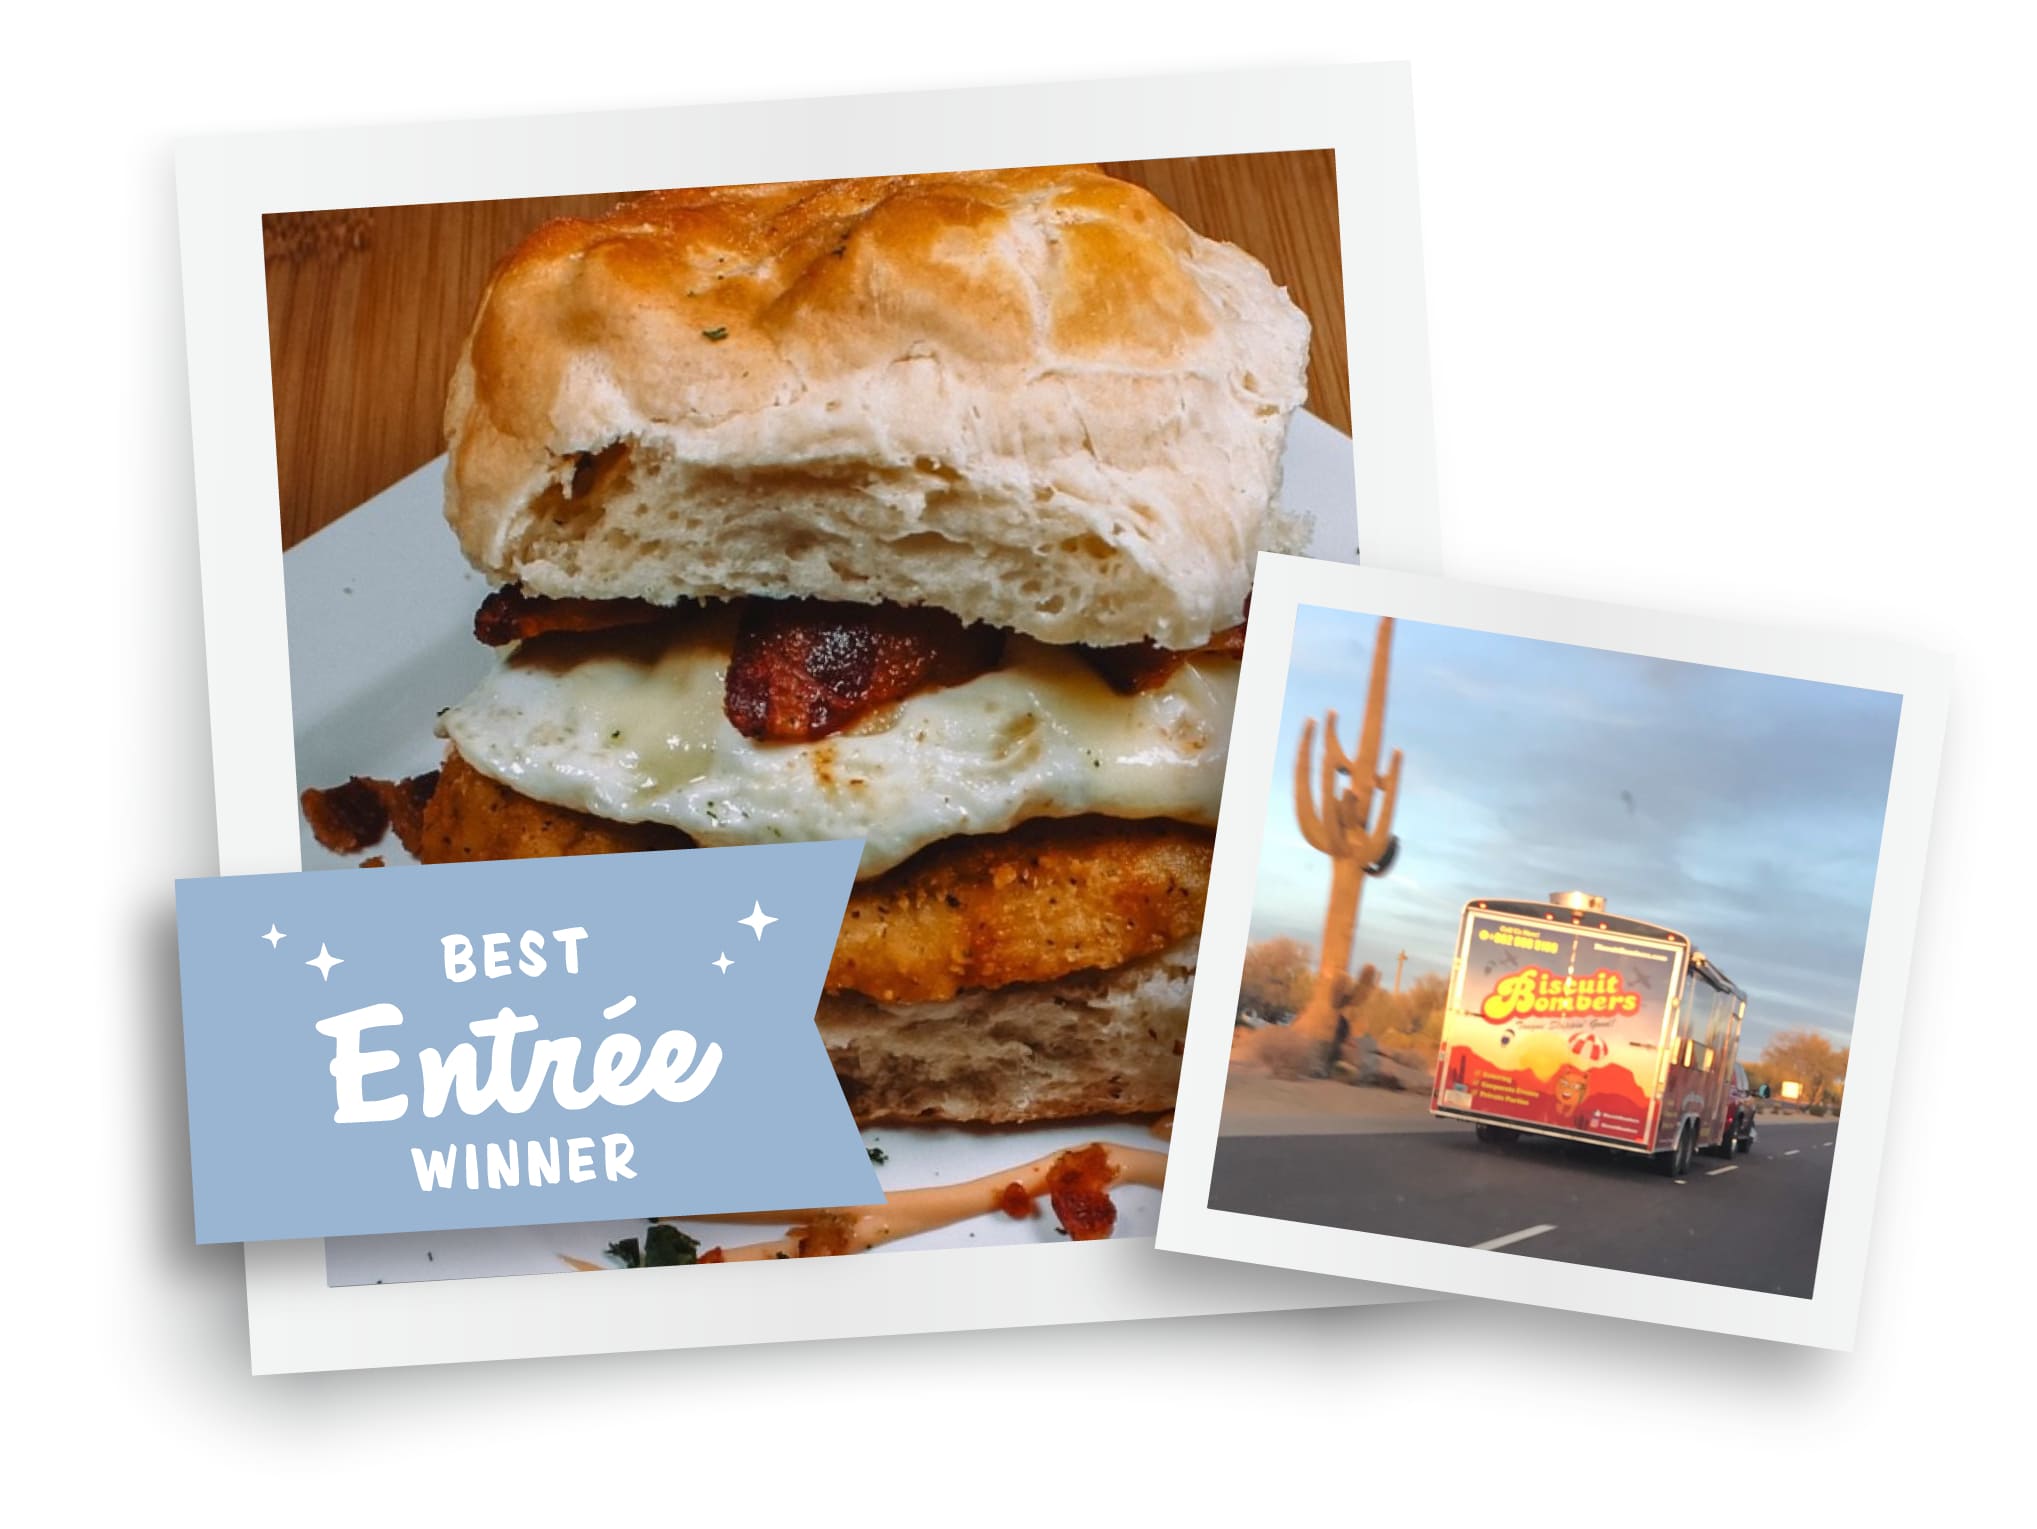 2 polaroid images. Left: Egg, bacon and chicken biscuit sandwich on white plate. Best Entrée Winner banner. Right: Biscuit Bomber food truck driving in Arizona with a cactus.